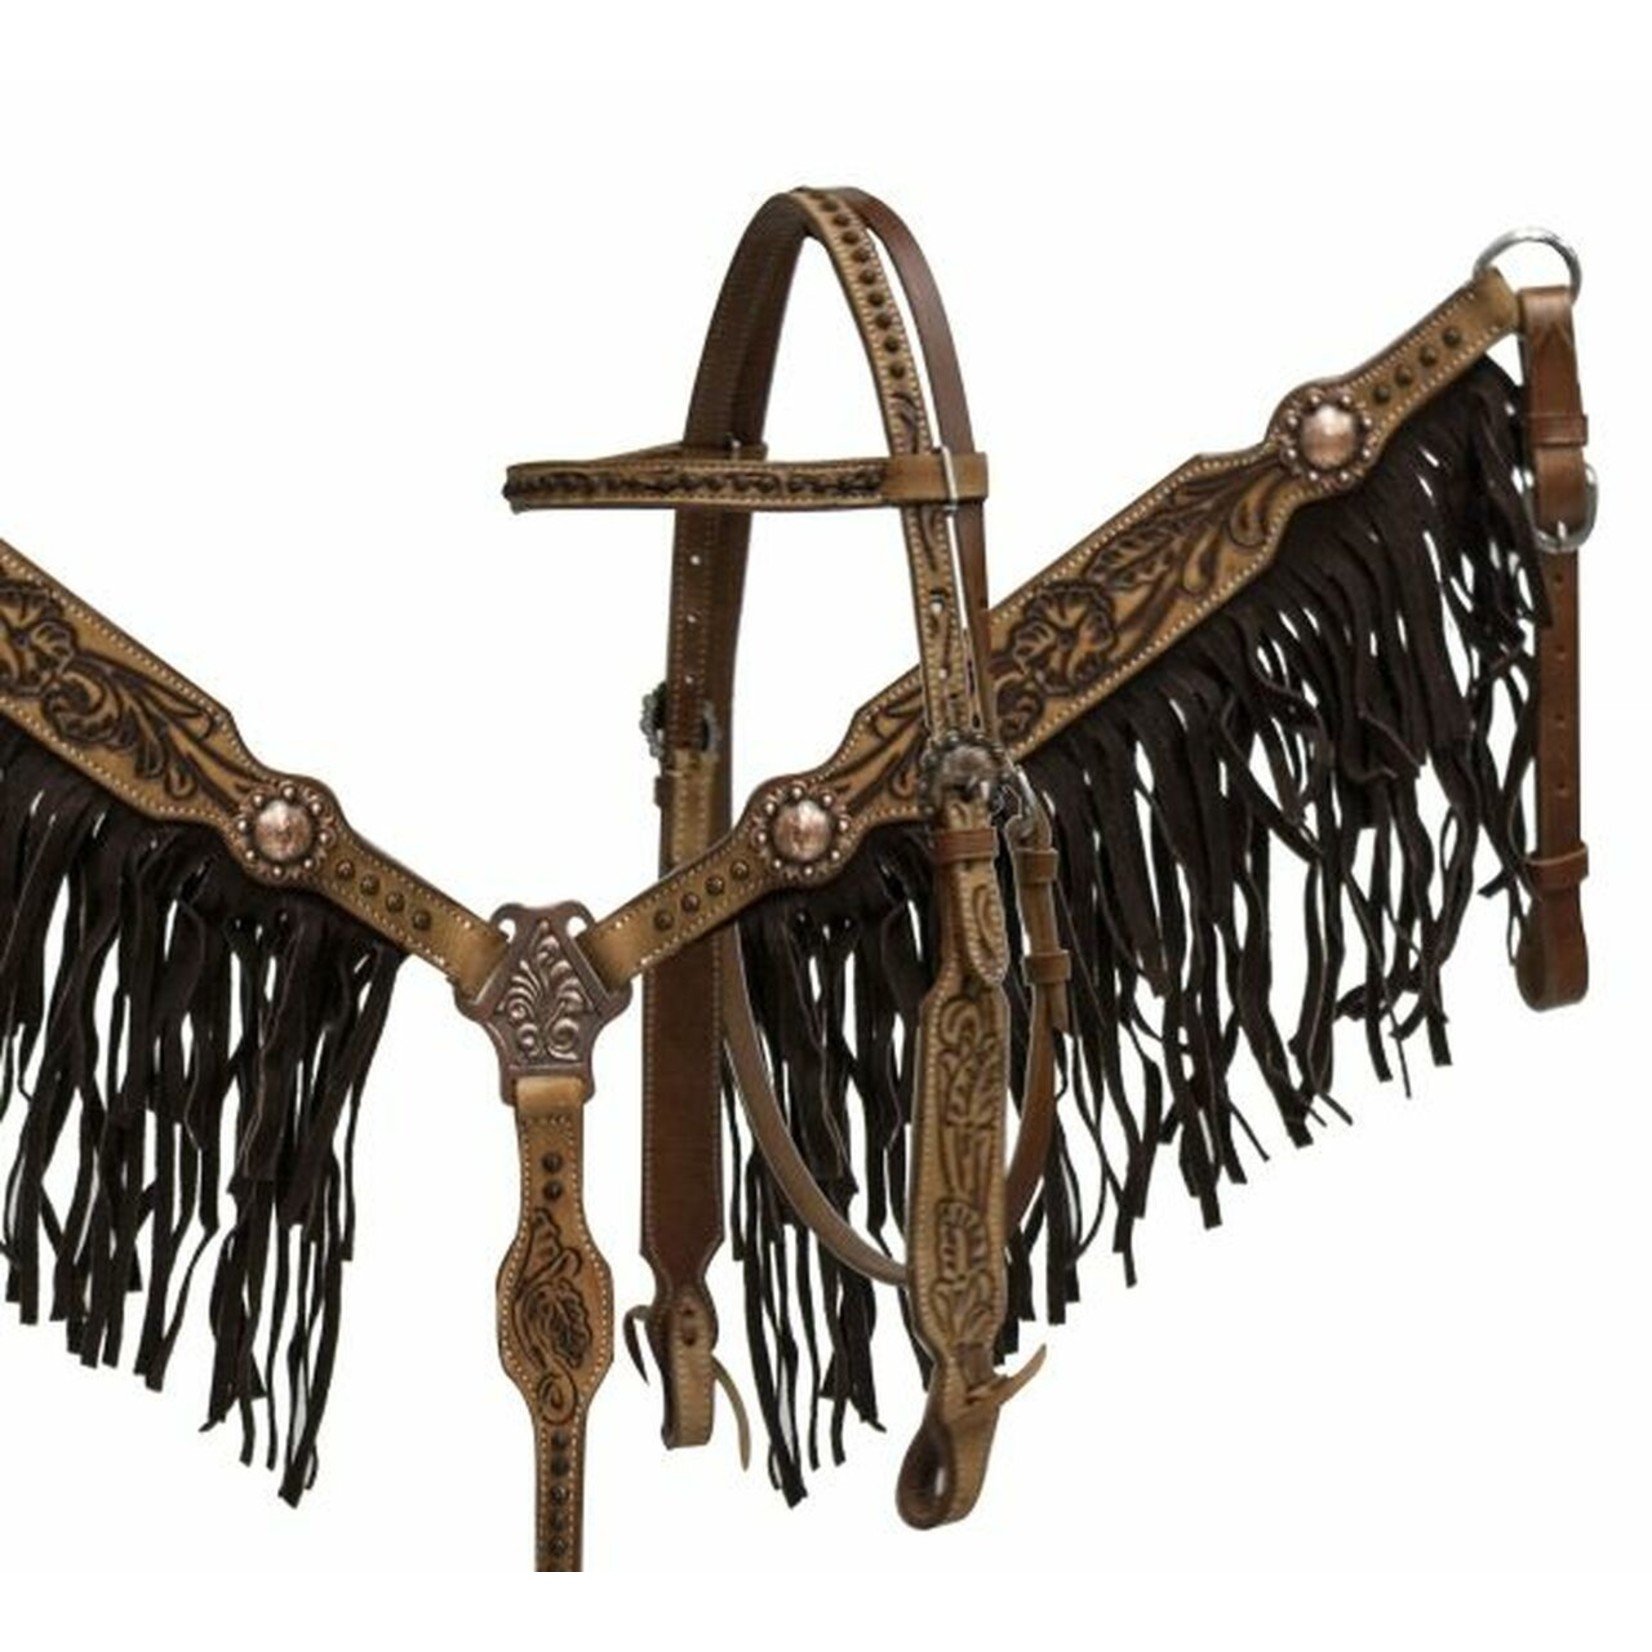 Showman Fringe Headstall and Breast Collar Set